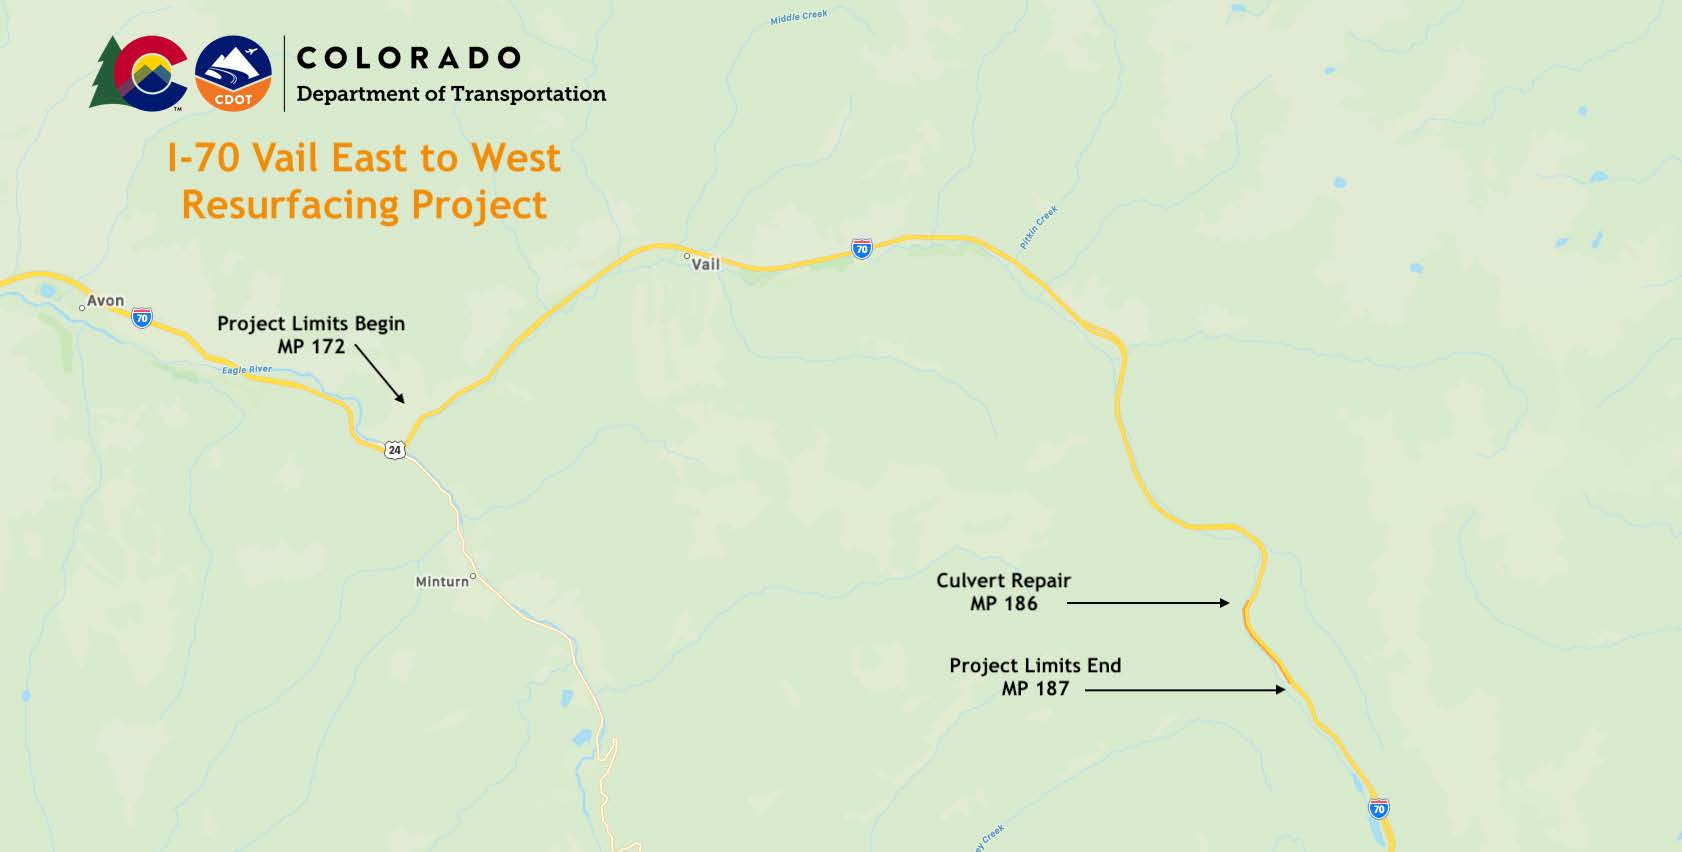 I-70 Vail East to West Resurfacing Project map detail image